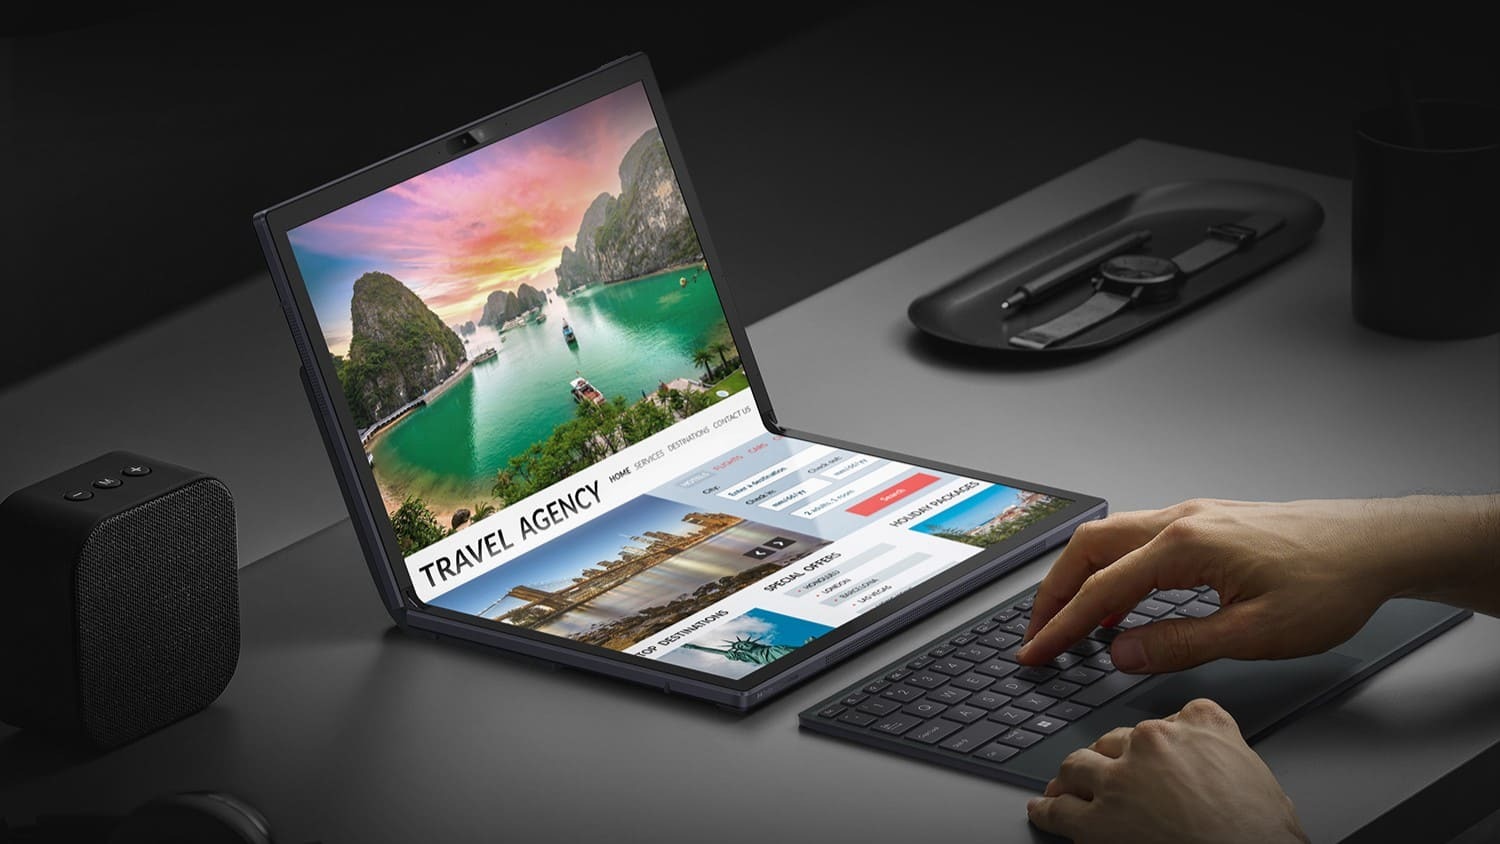 Samsung prepping foldable OLED display laptop with the largest screen  diagonal when closed - NotebookCheck.net News